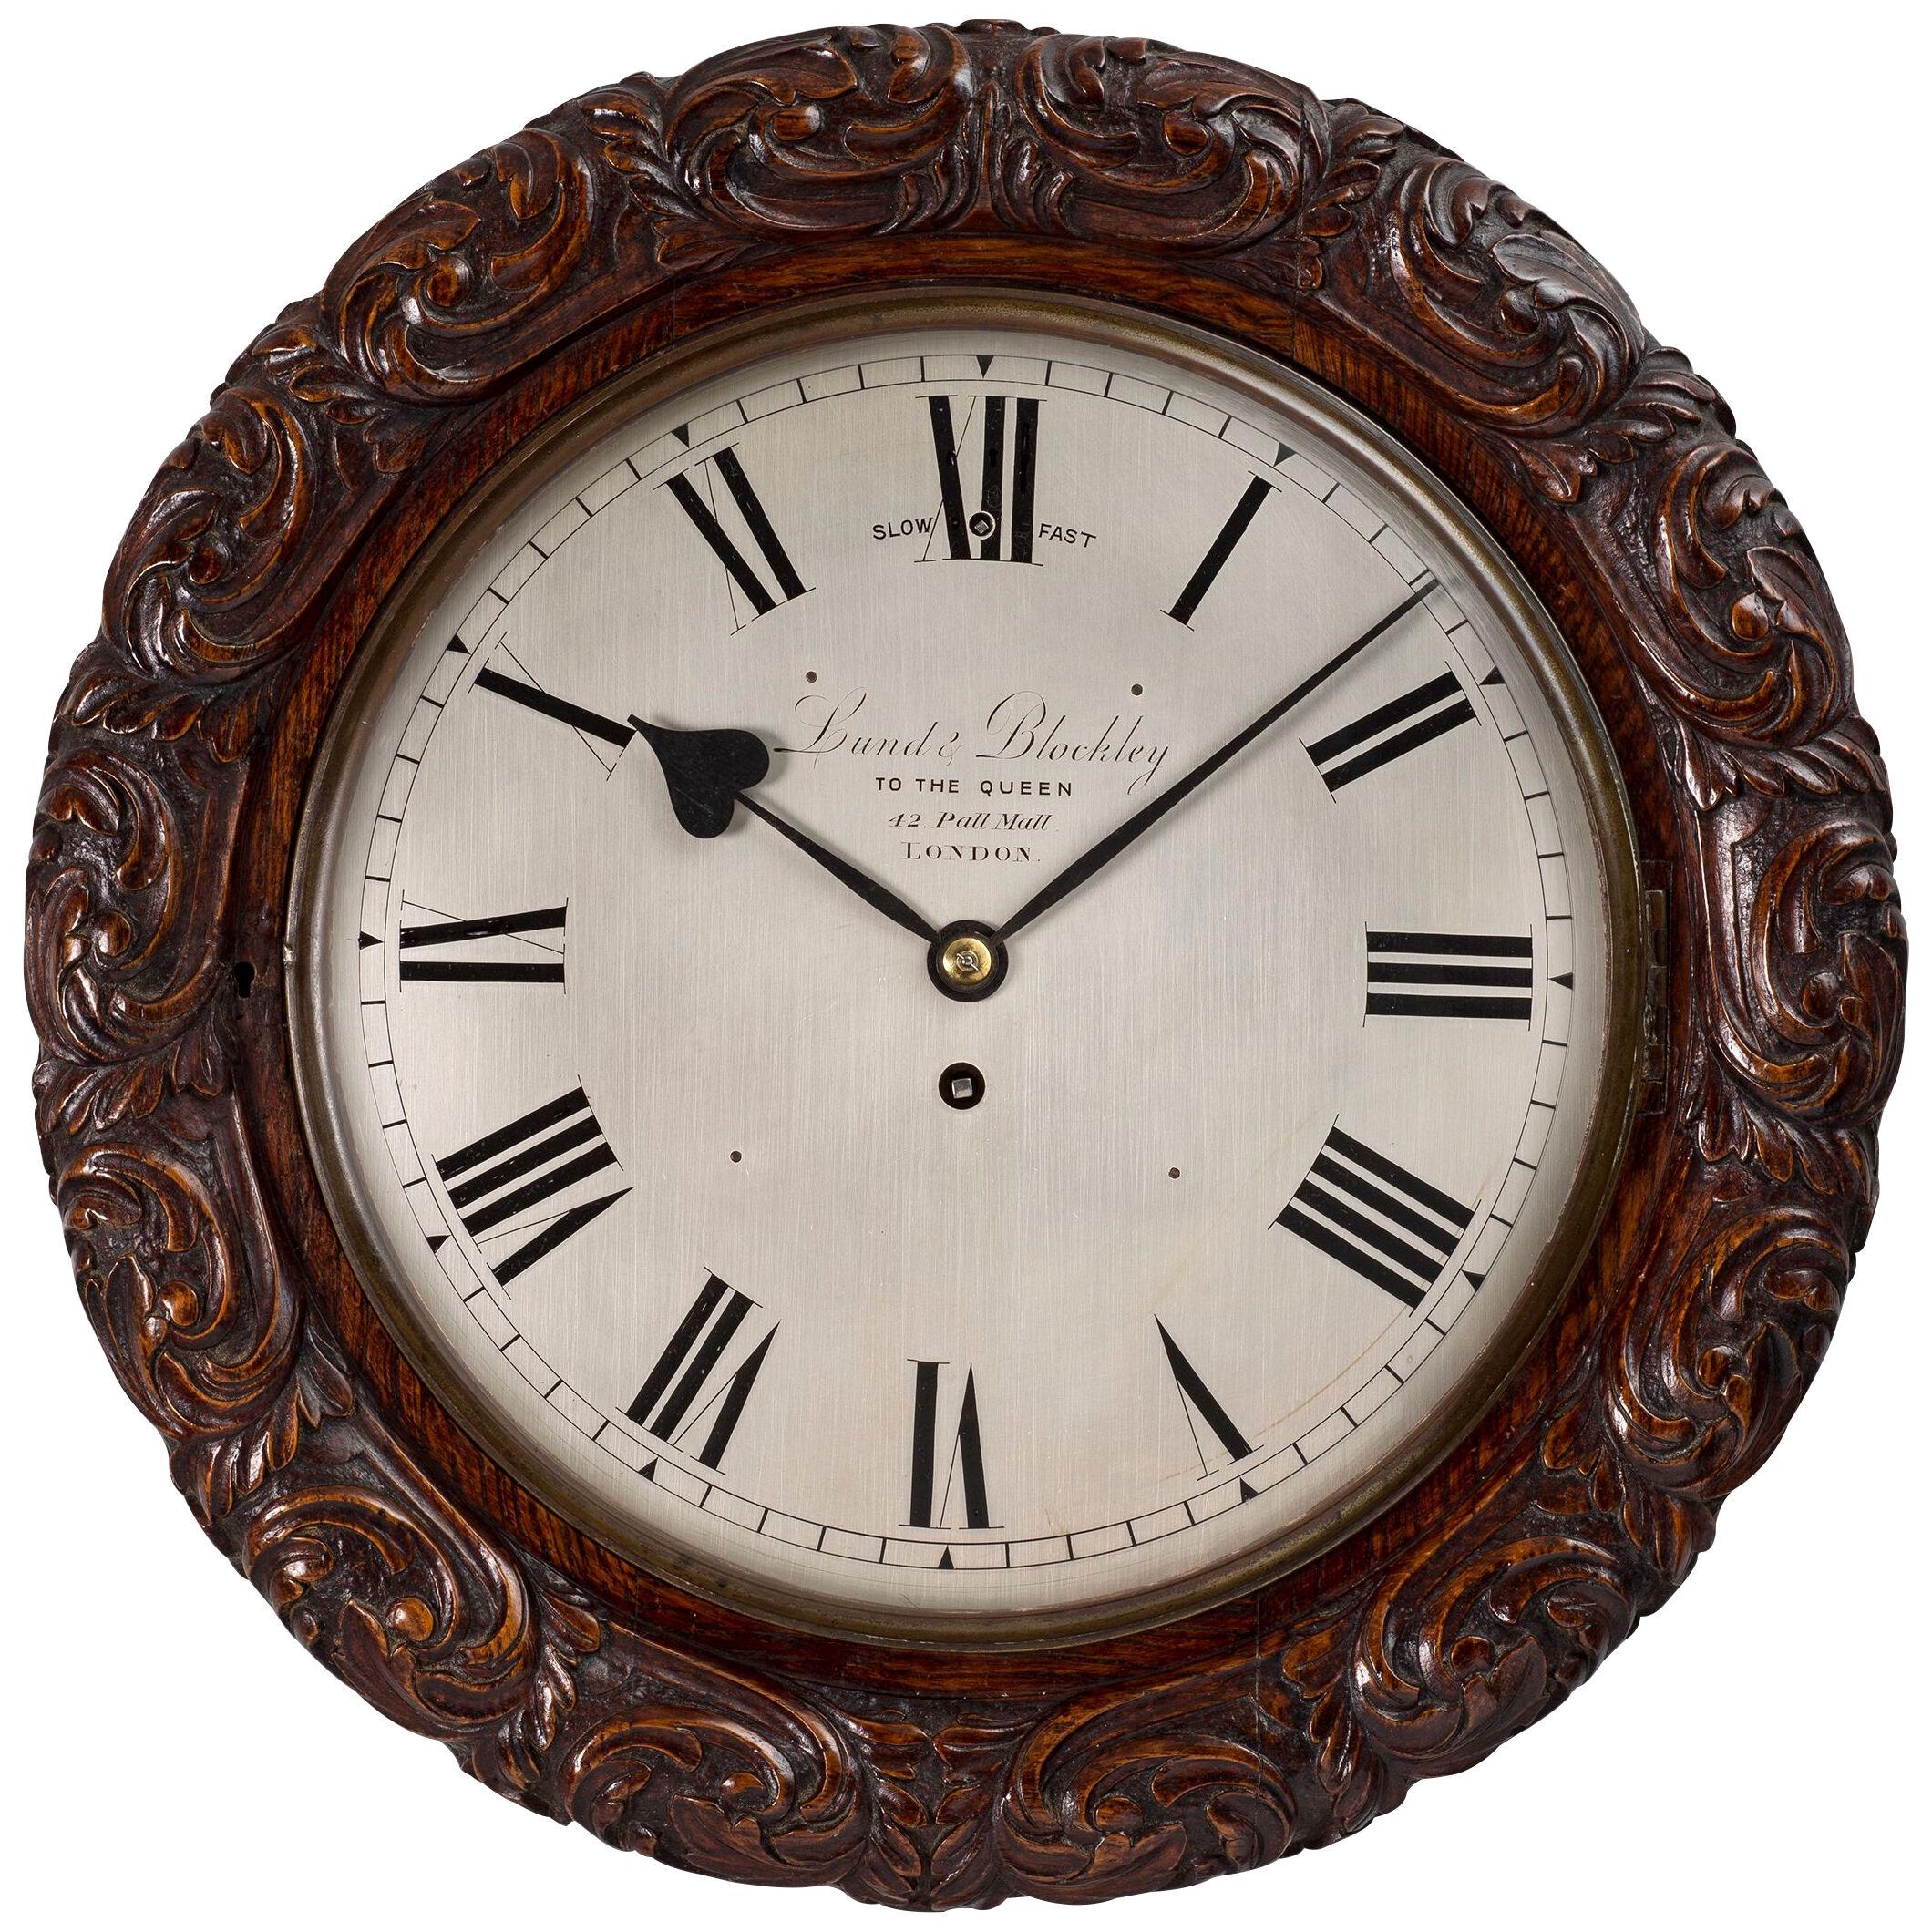 VICTORIAN ANTIQUE OAK CASED WALL CLOCK BY LUND & BLOCKLEY OF LONDON